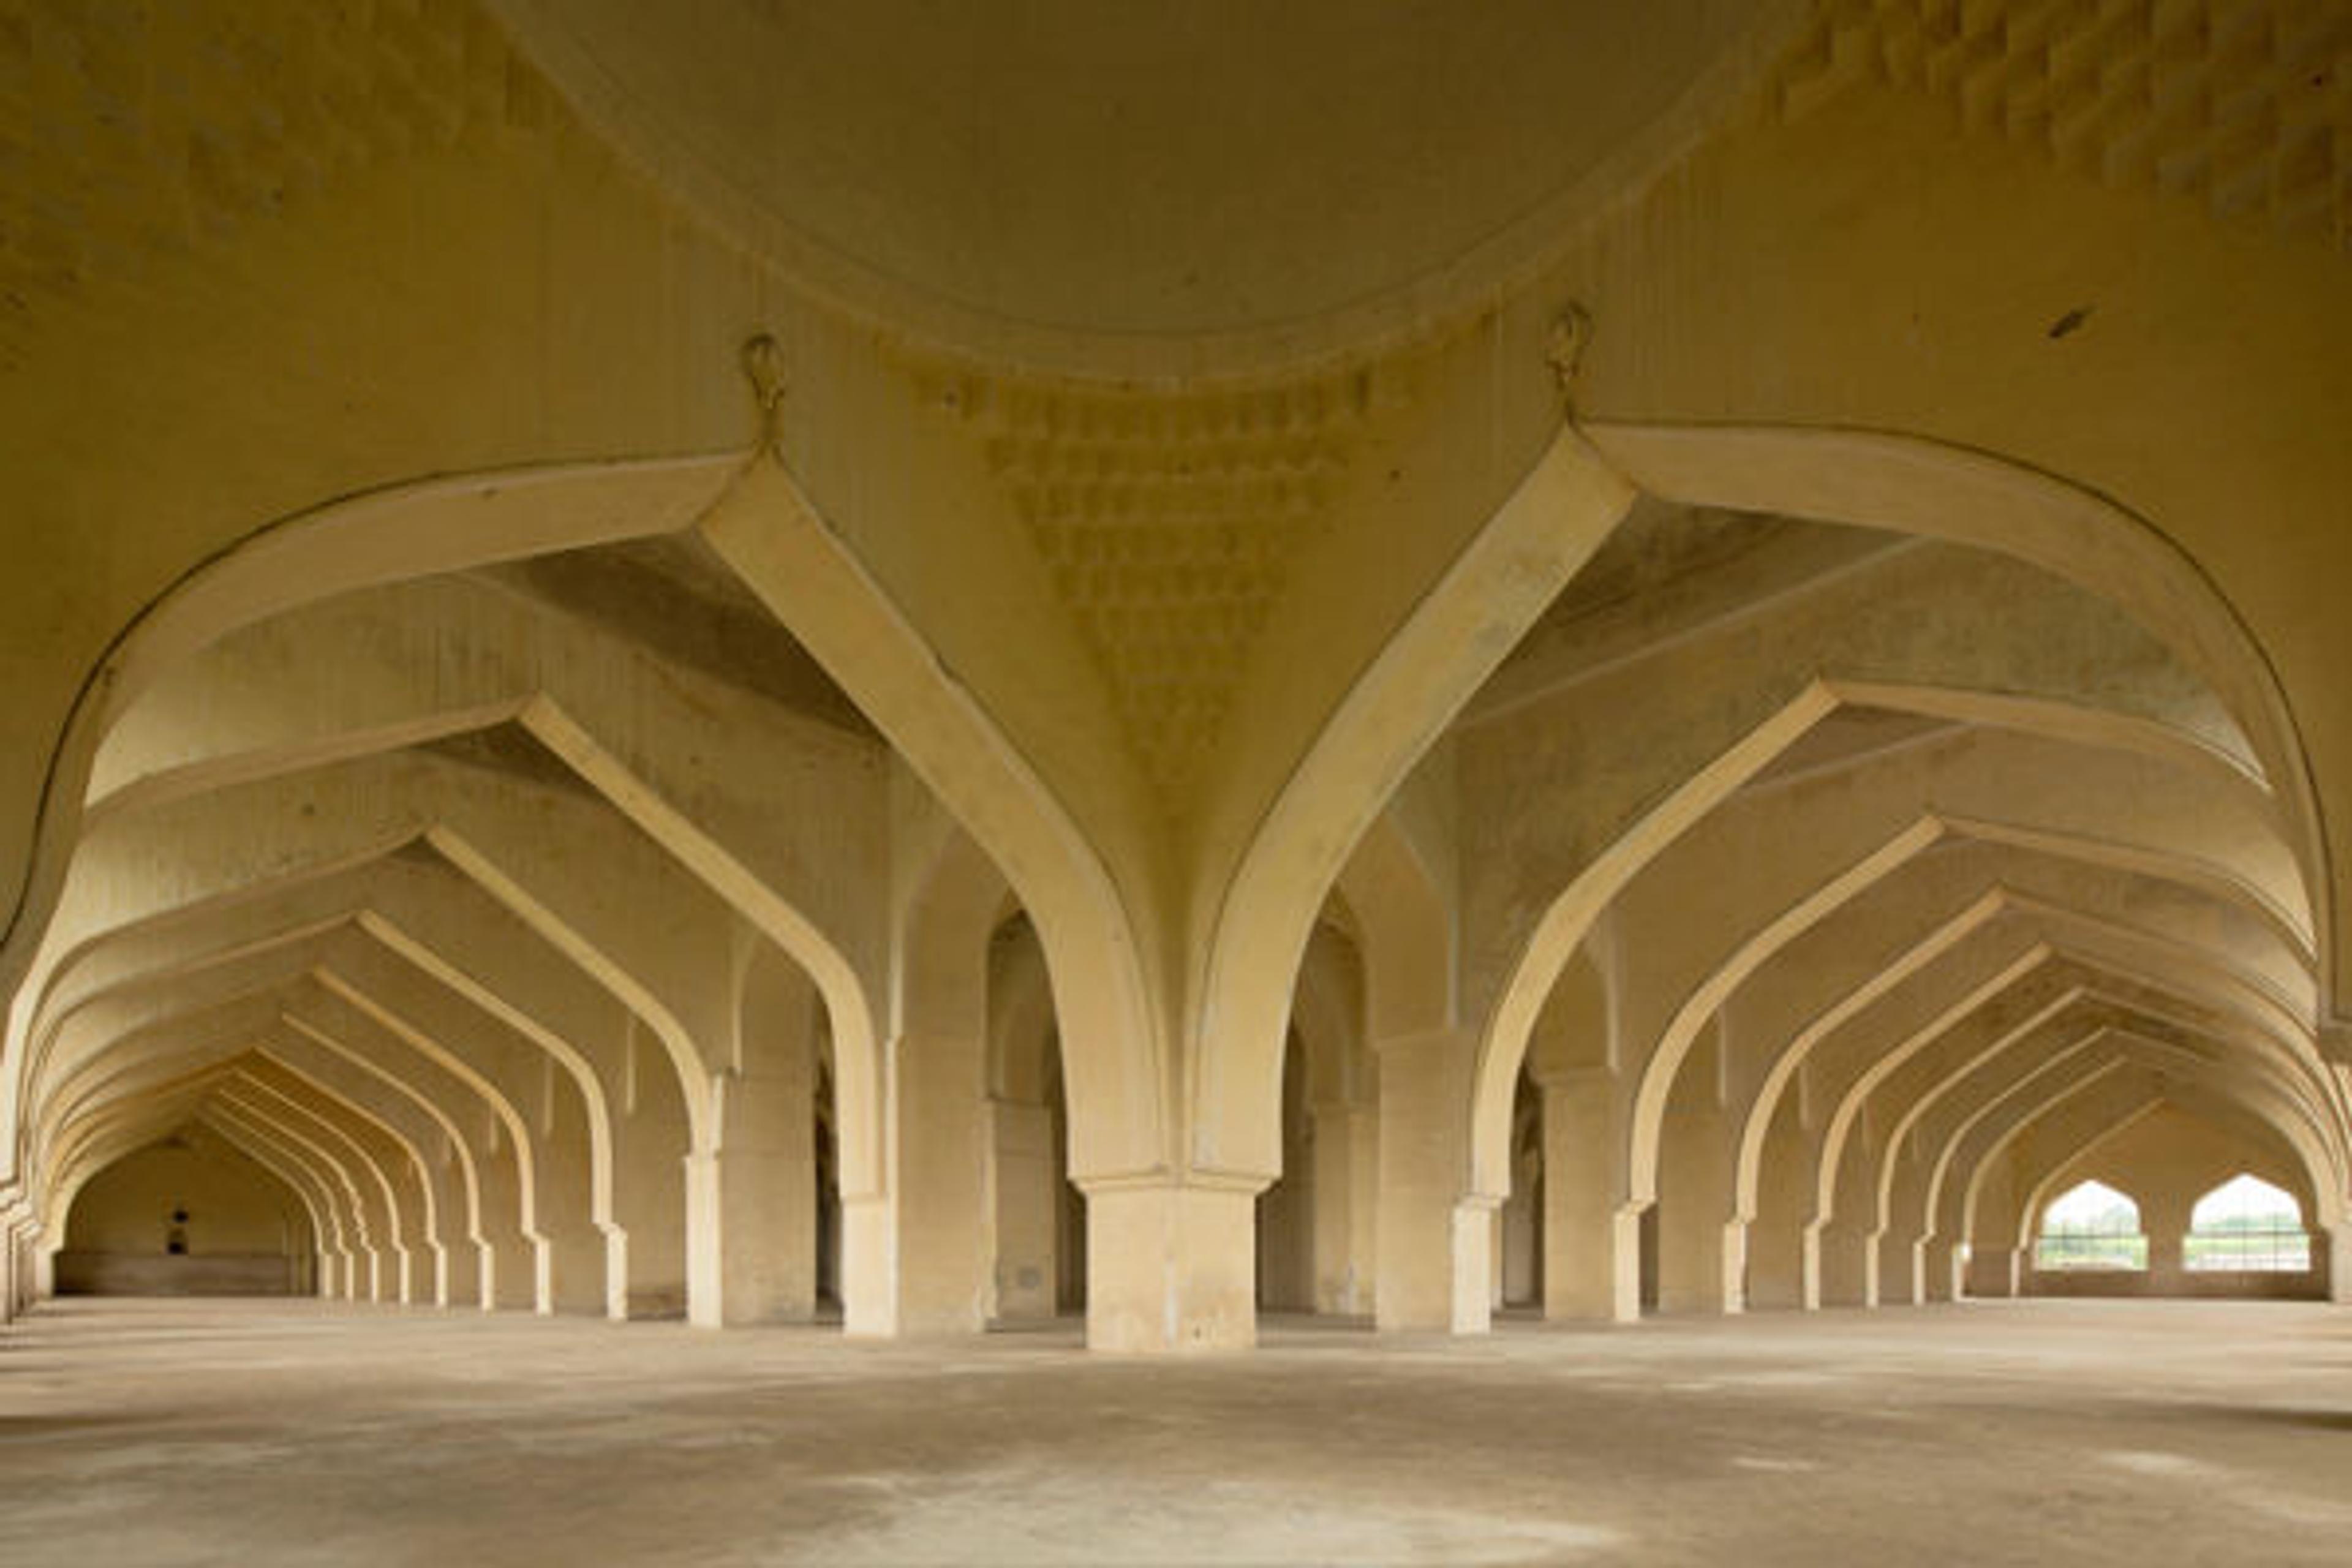 Outer gallery, Jami Masjid (Congregational Mosque), Gulbarga, late 14th–early 15th century. Photography © Antonio Martinelli